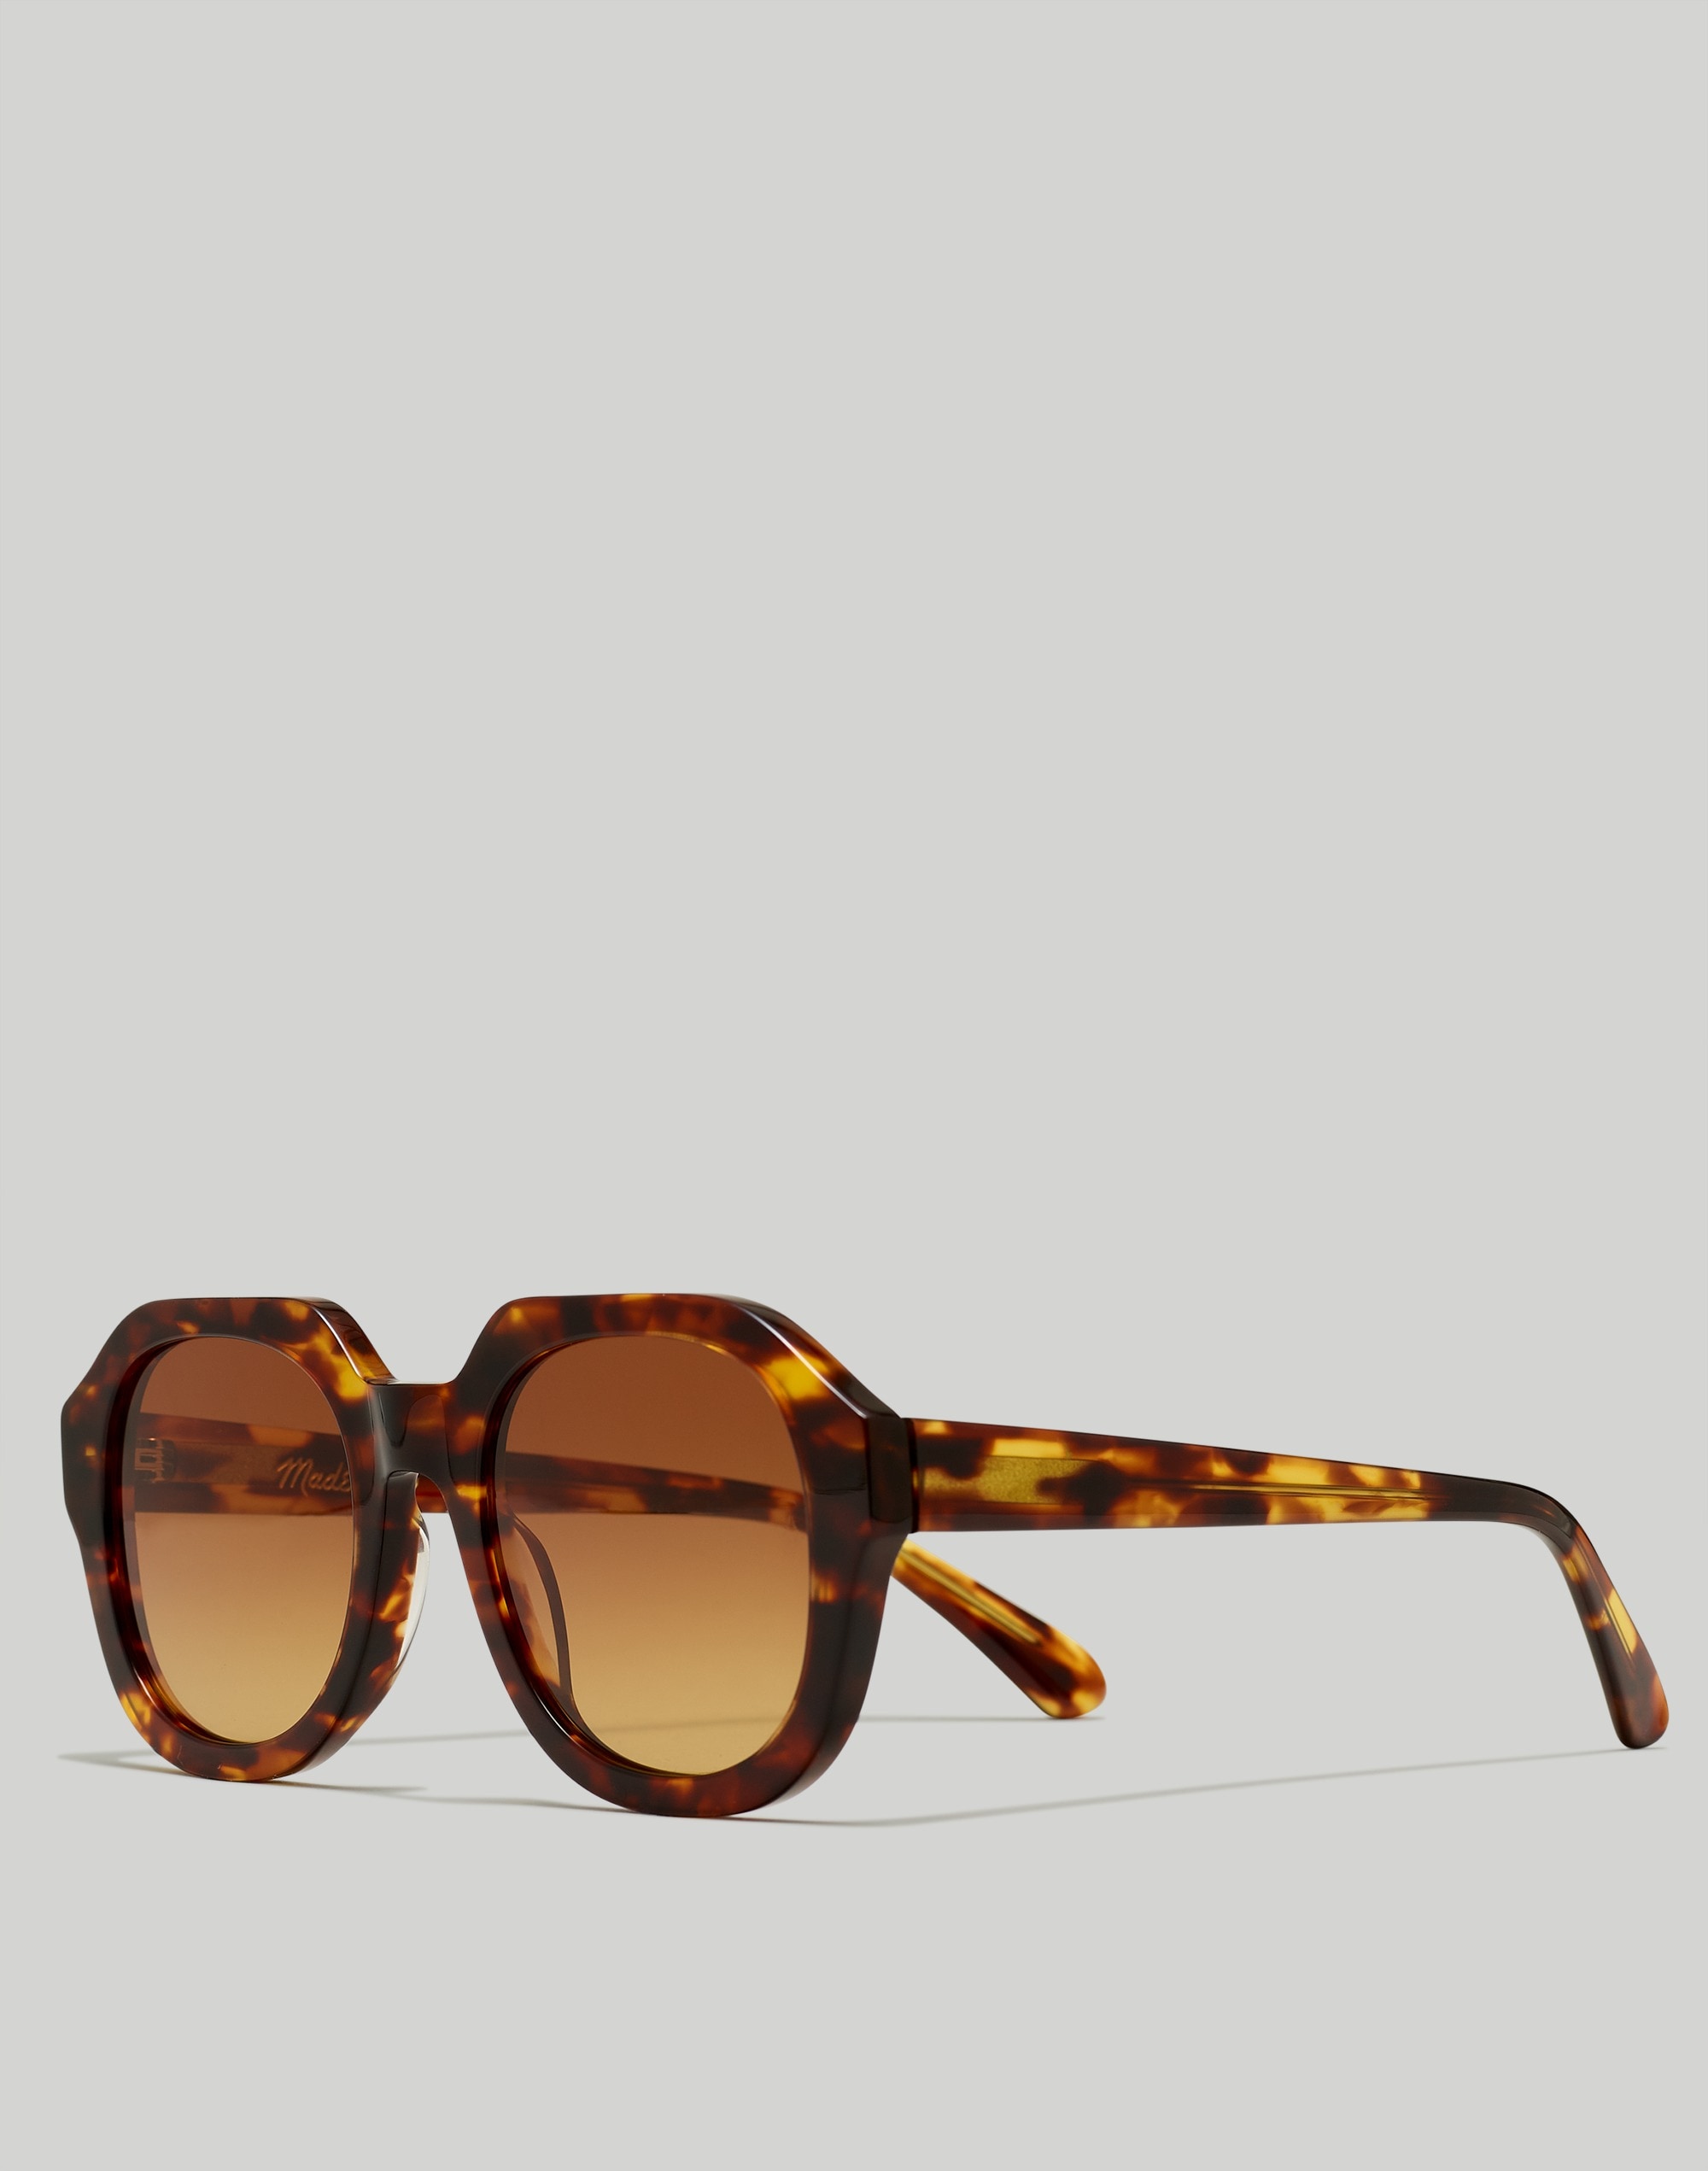 Mw Ralston Sunglasses In Whisky Tort